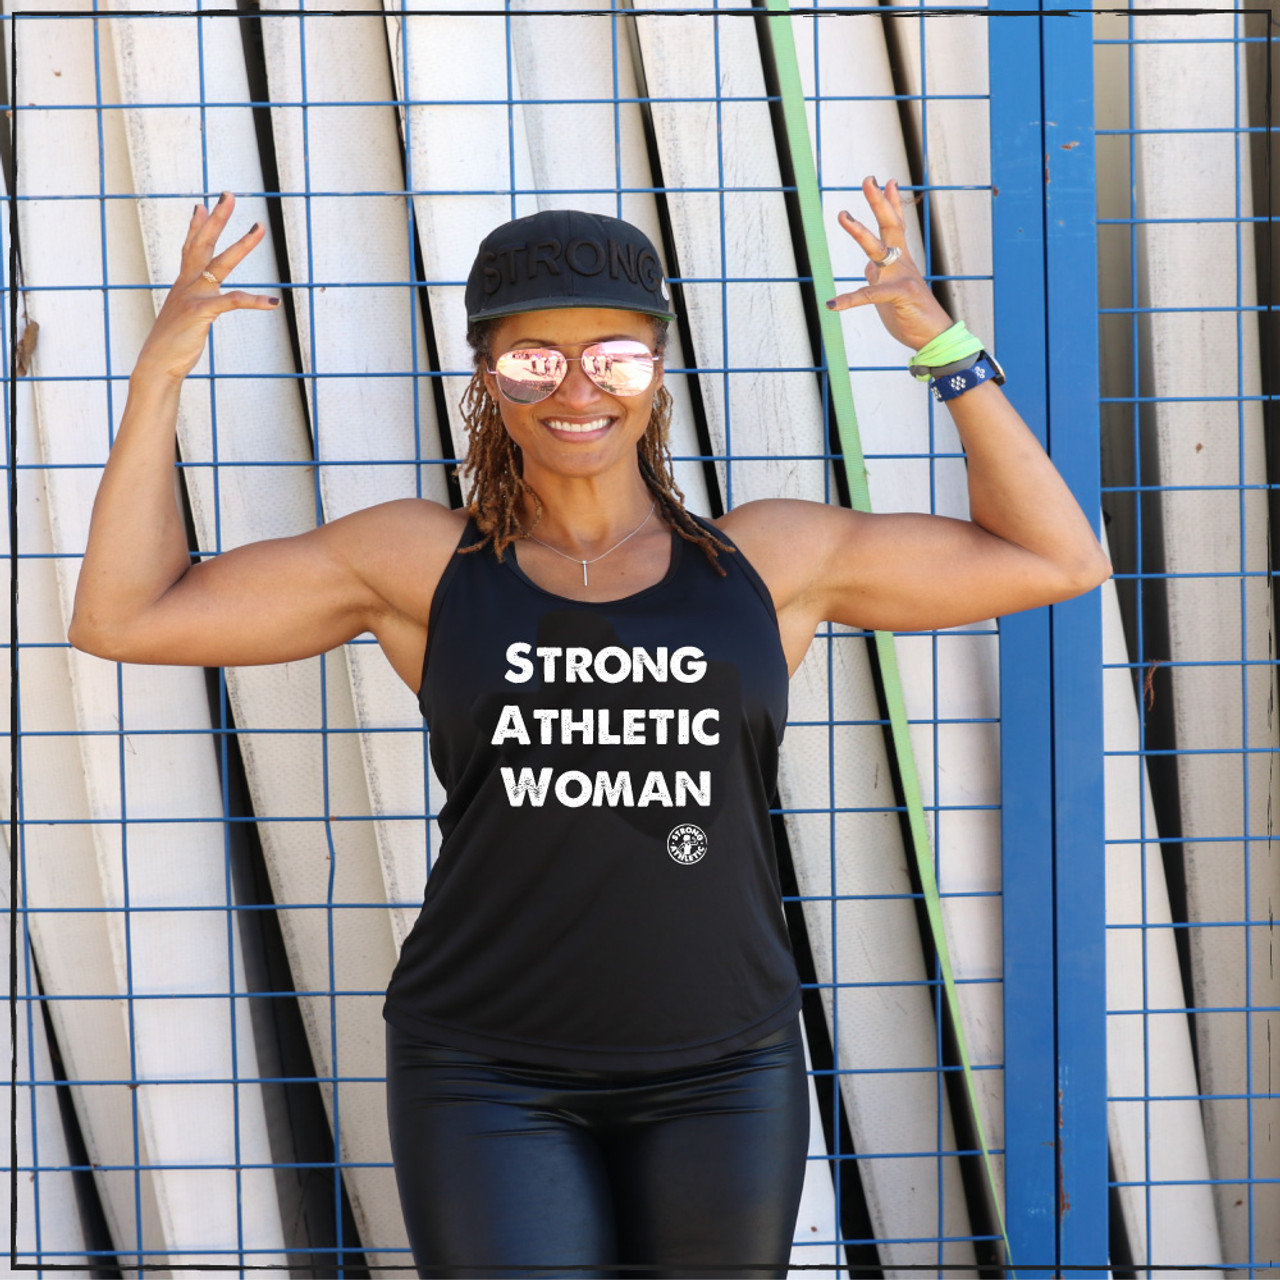 Moisture Wicking Shirts for Active Women the Strong Athletic Woman